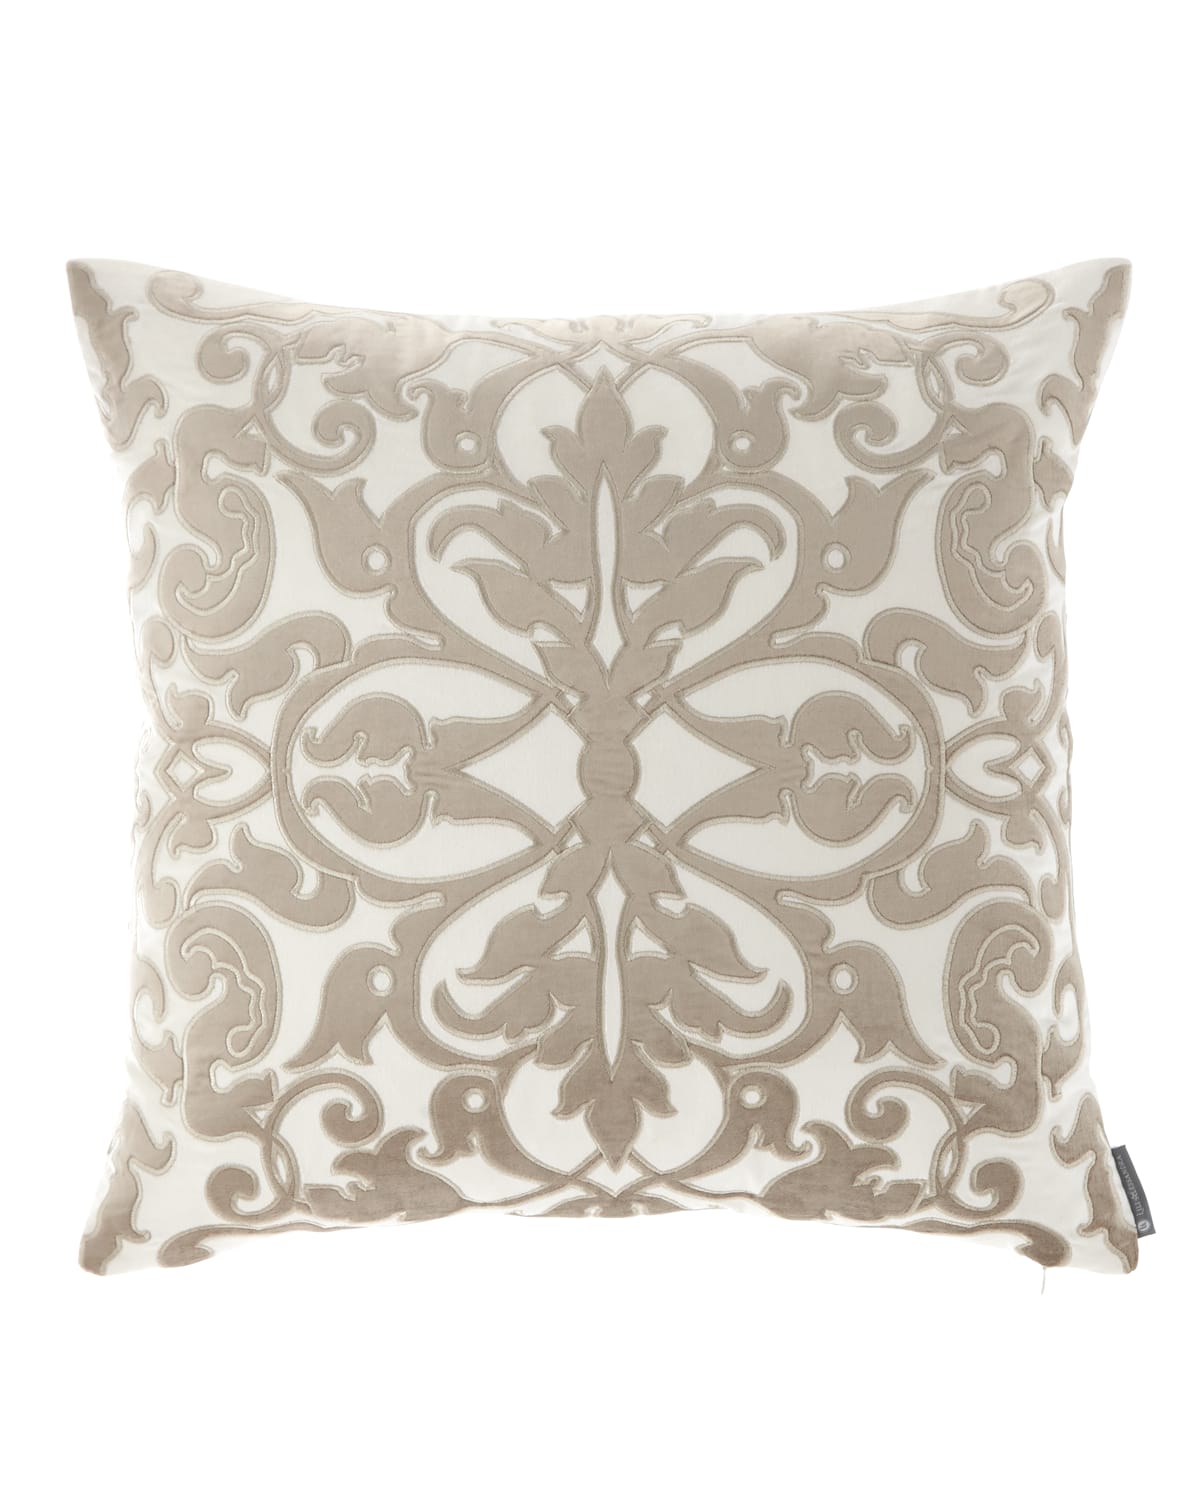 Shop Lili Alessandra Diana Applique Pillow, 22"sq. In Ivory